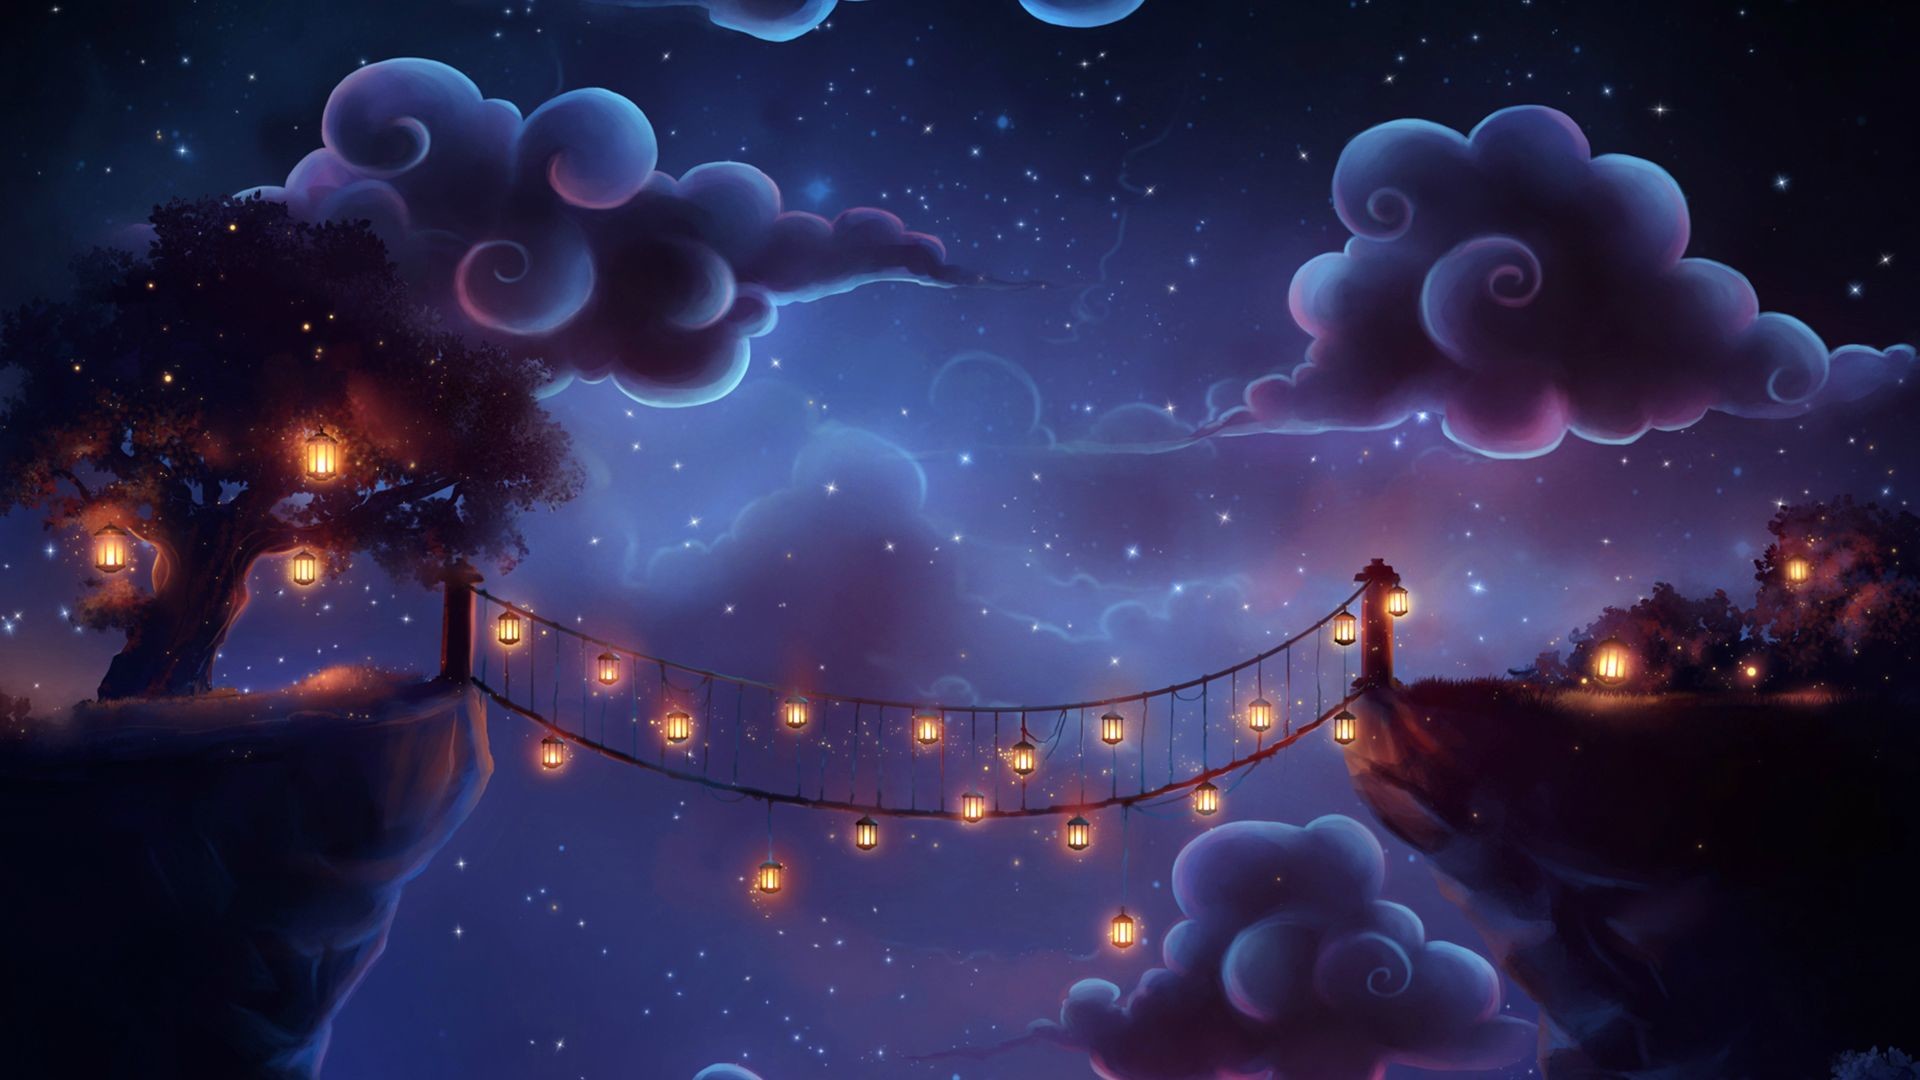 Animated Night Sky Wallpaper (51+ Images)